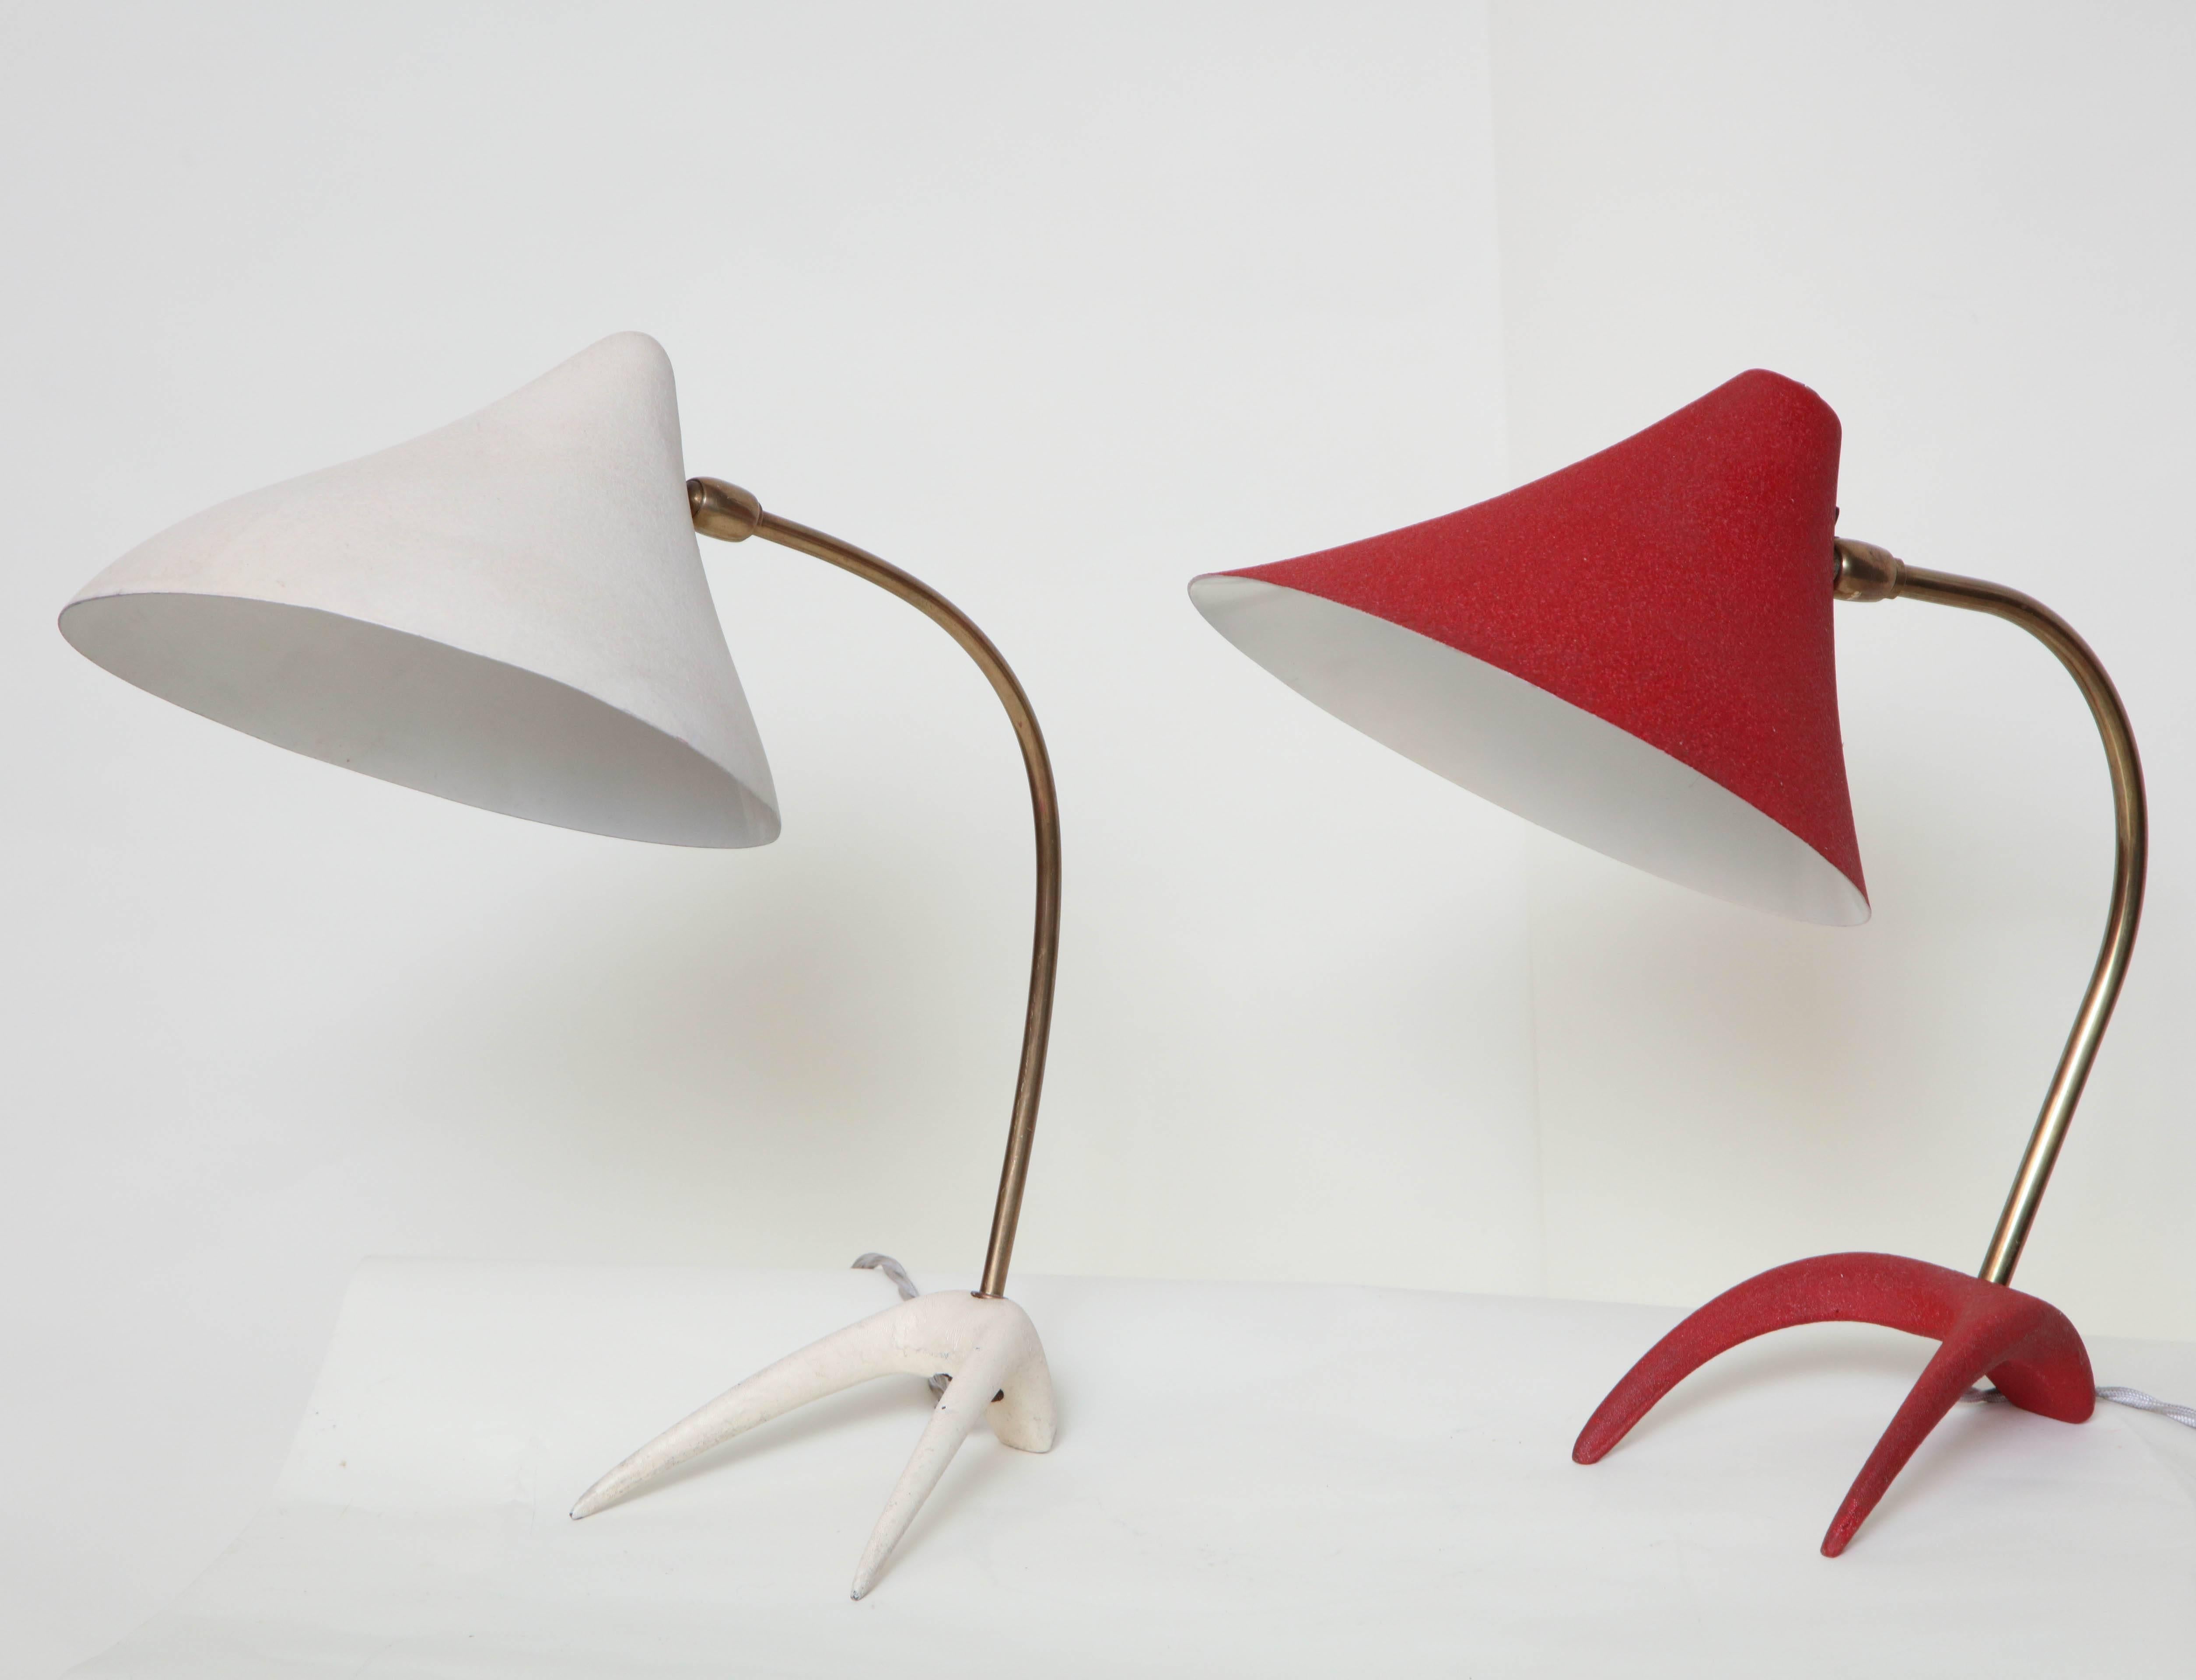 A pair of articulated table lamps 1950s Mid-Century Modern attributed to Kalmar.